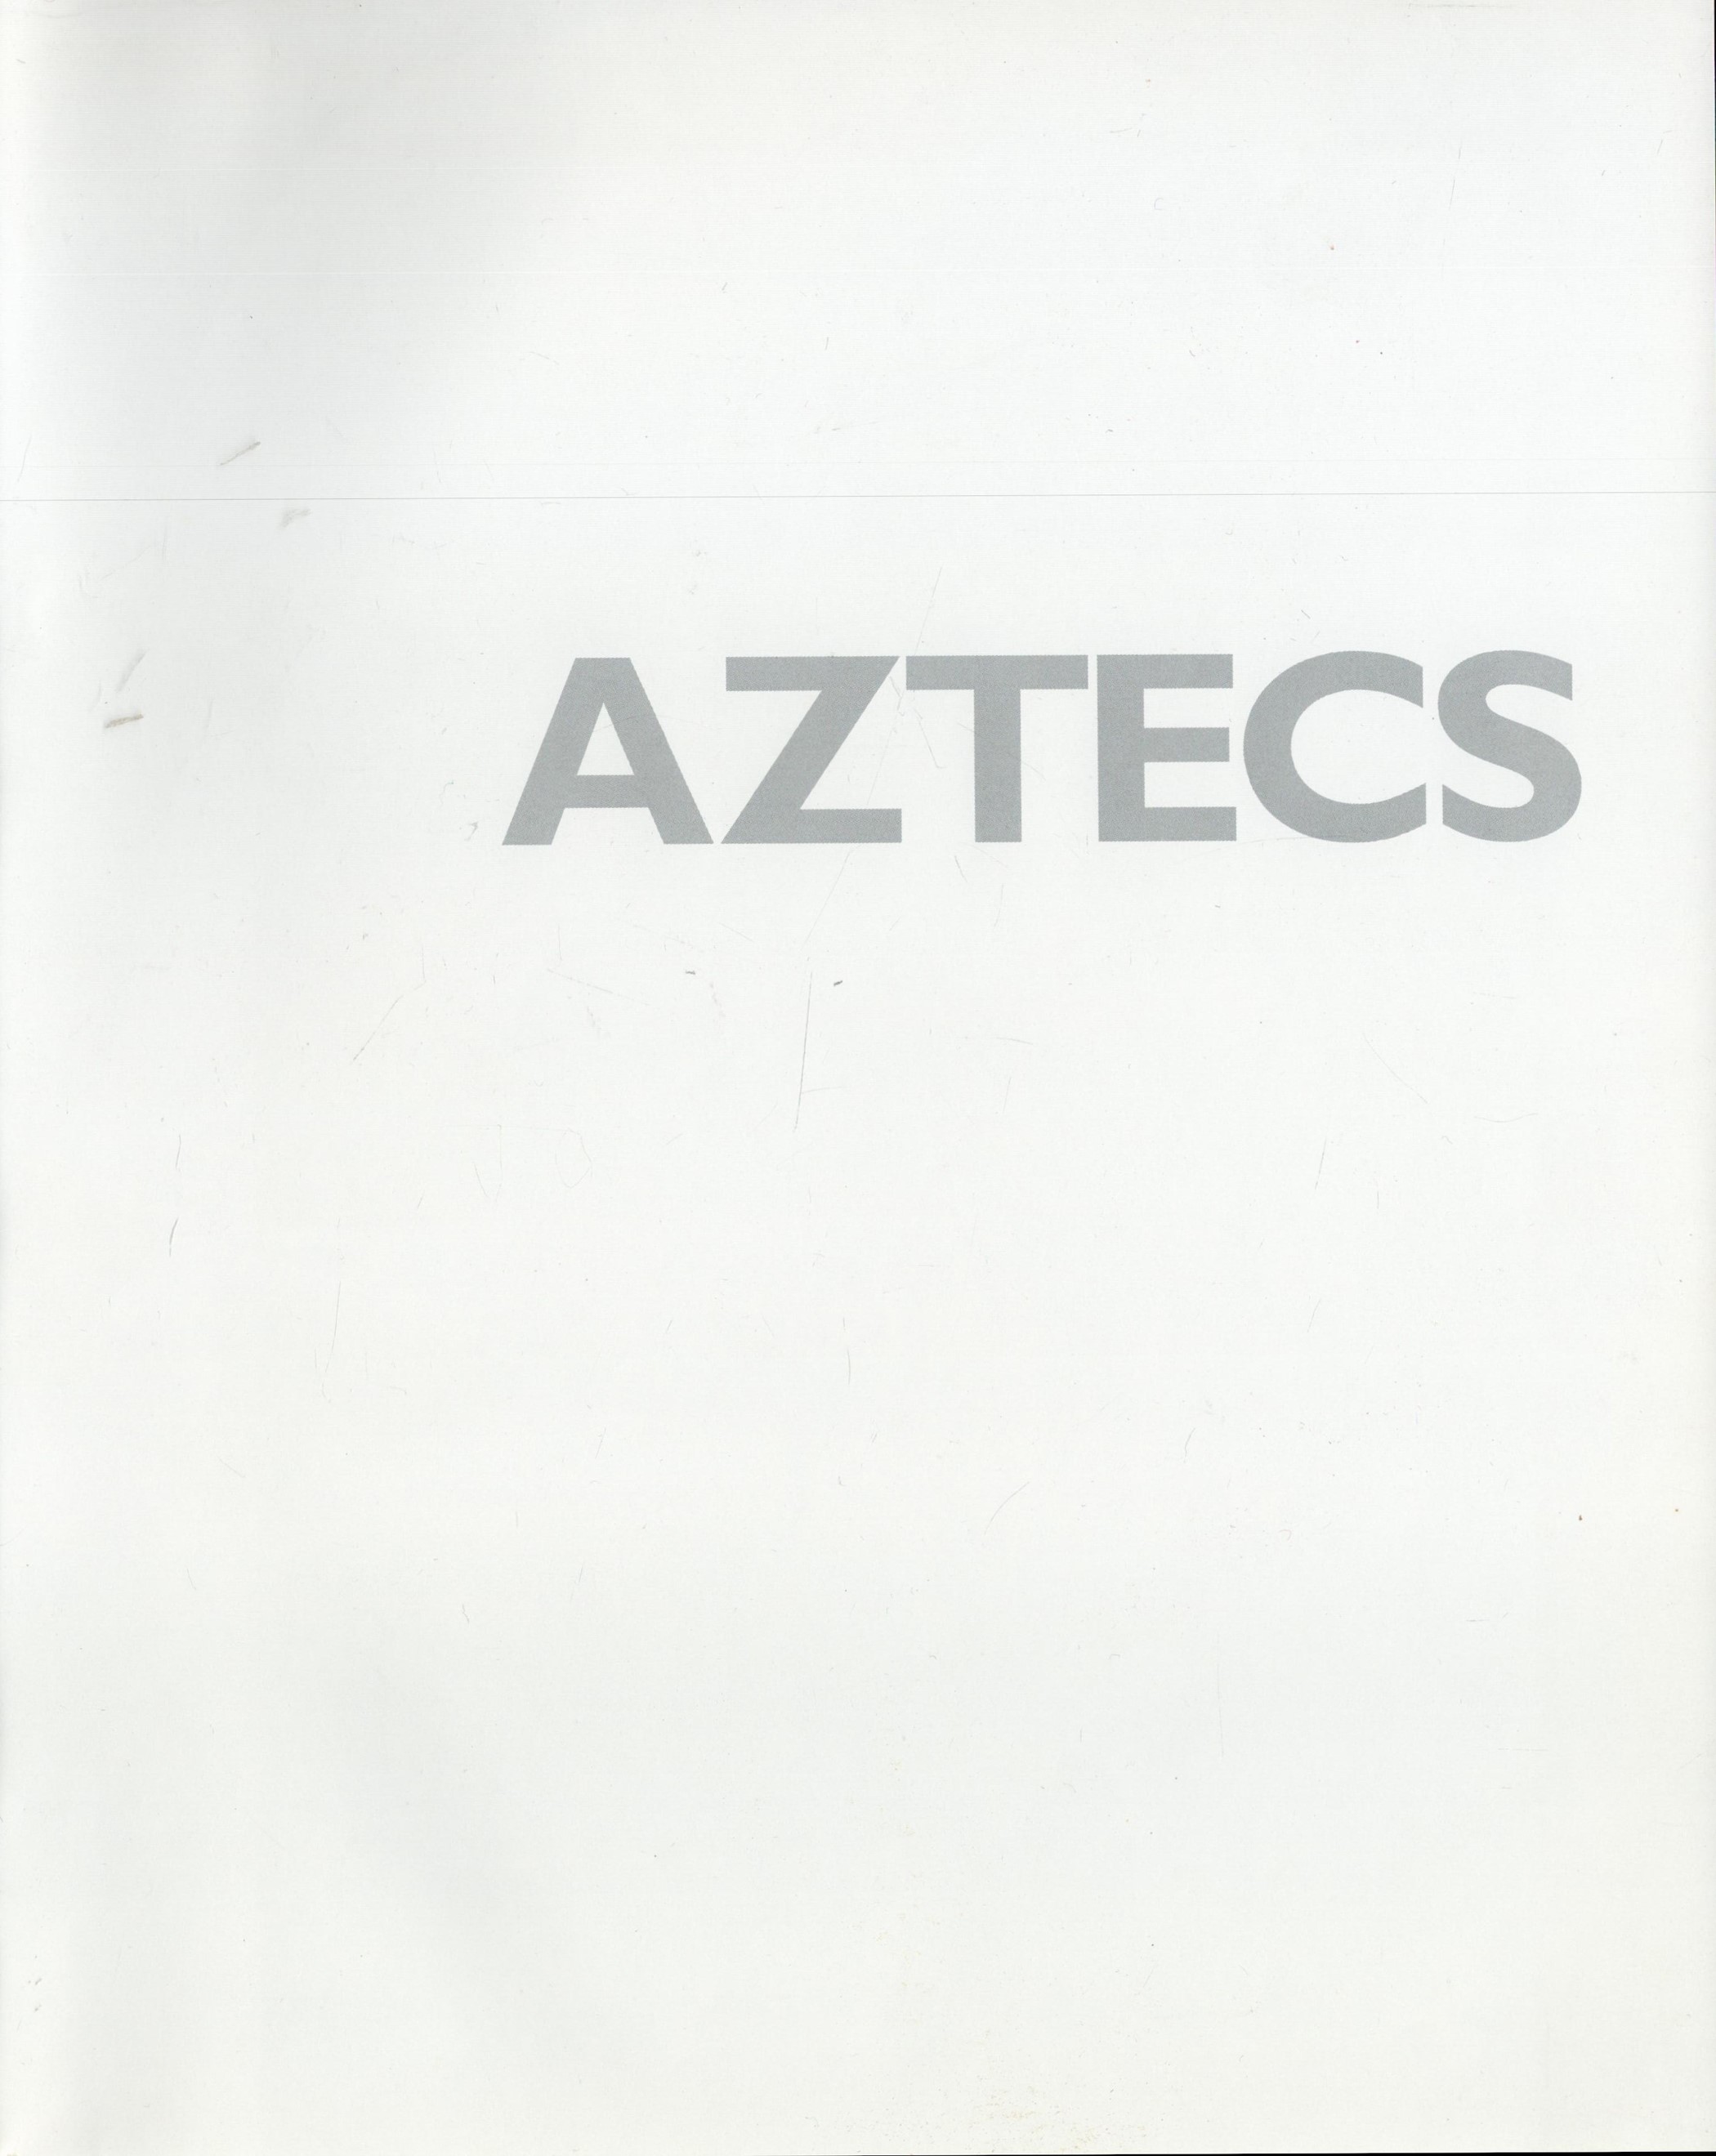 Aztecs edited by Michael Foster 2003 First Edition Softback Book with 520 pages published by Royal - Image 2 of 3